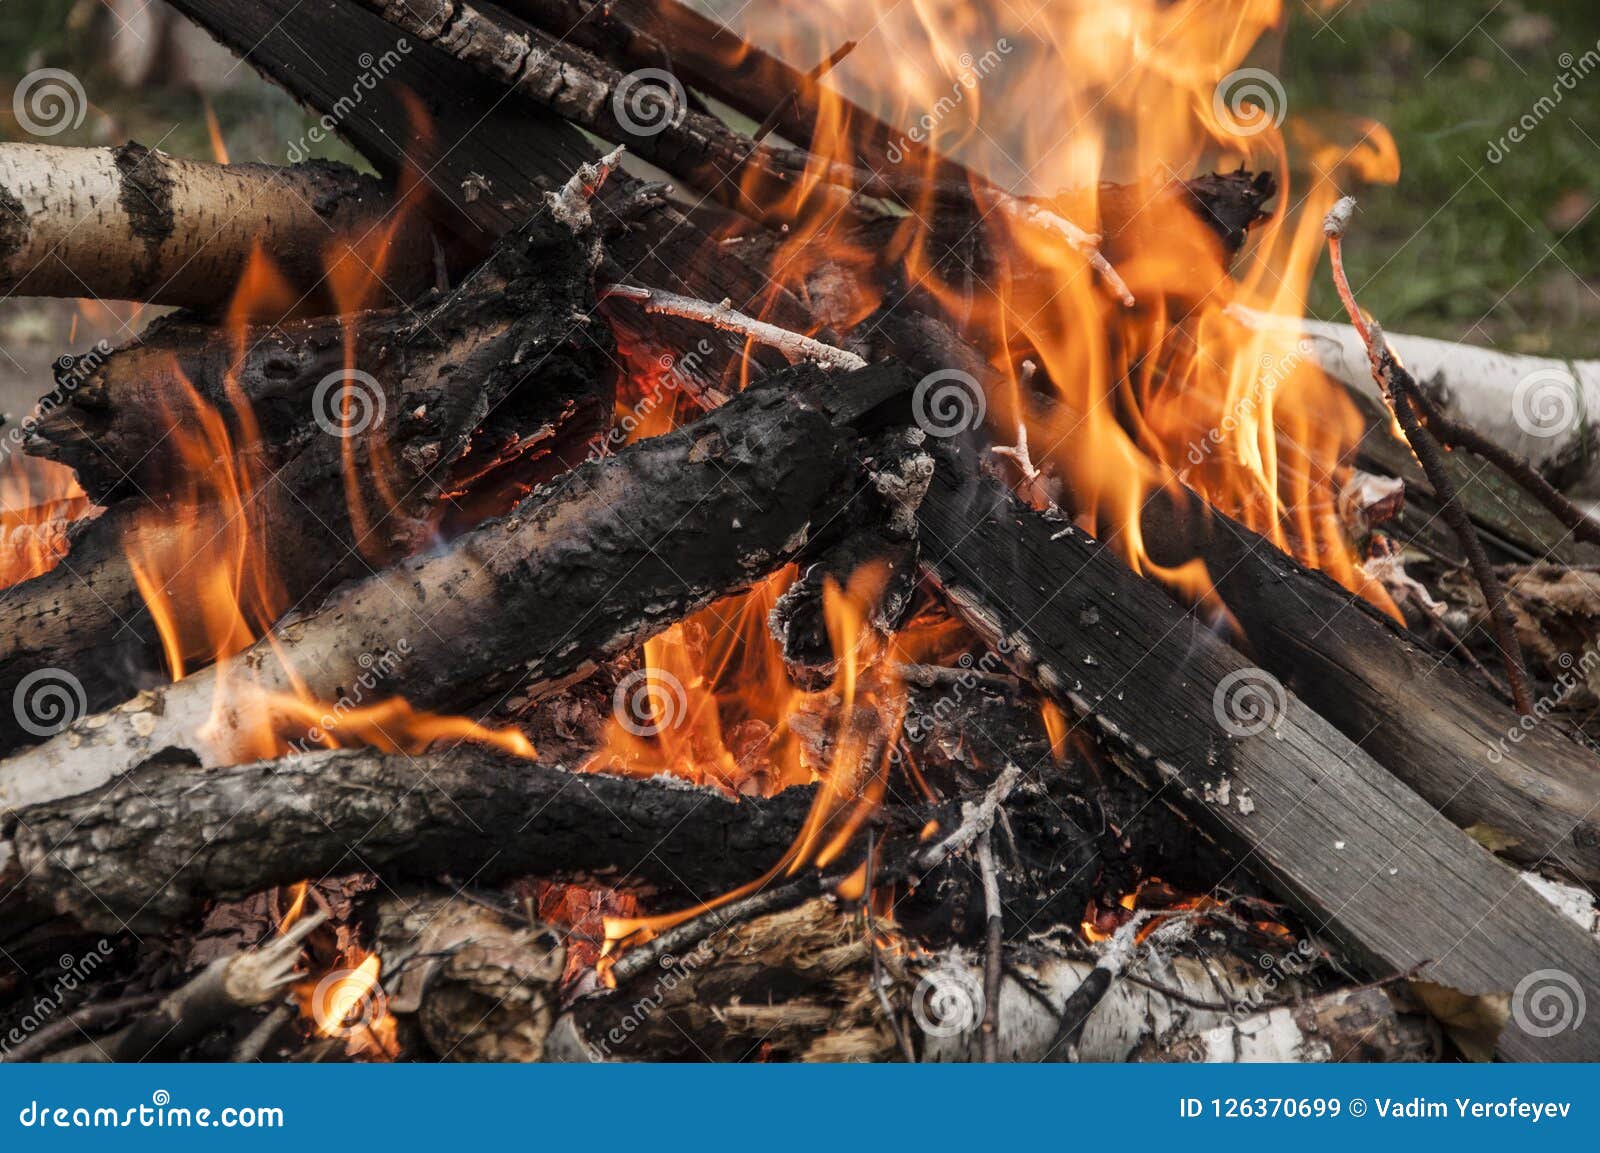 The Fire is Burning in Nature Stock Image - Image of danger, orange ...